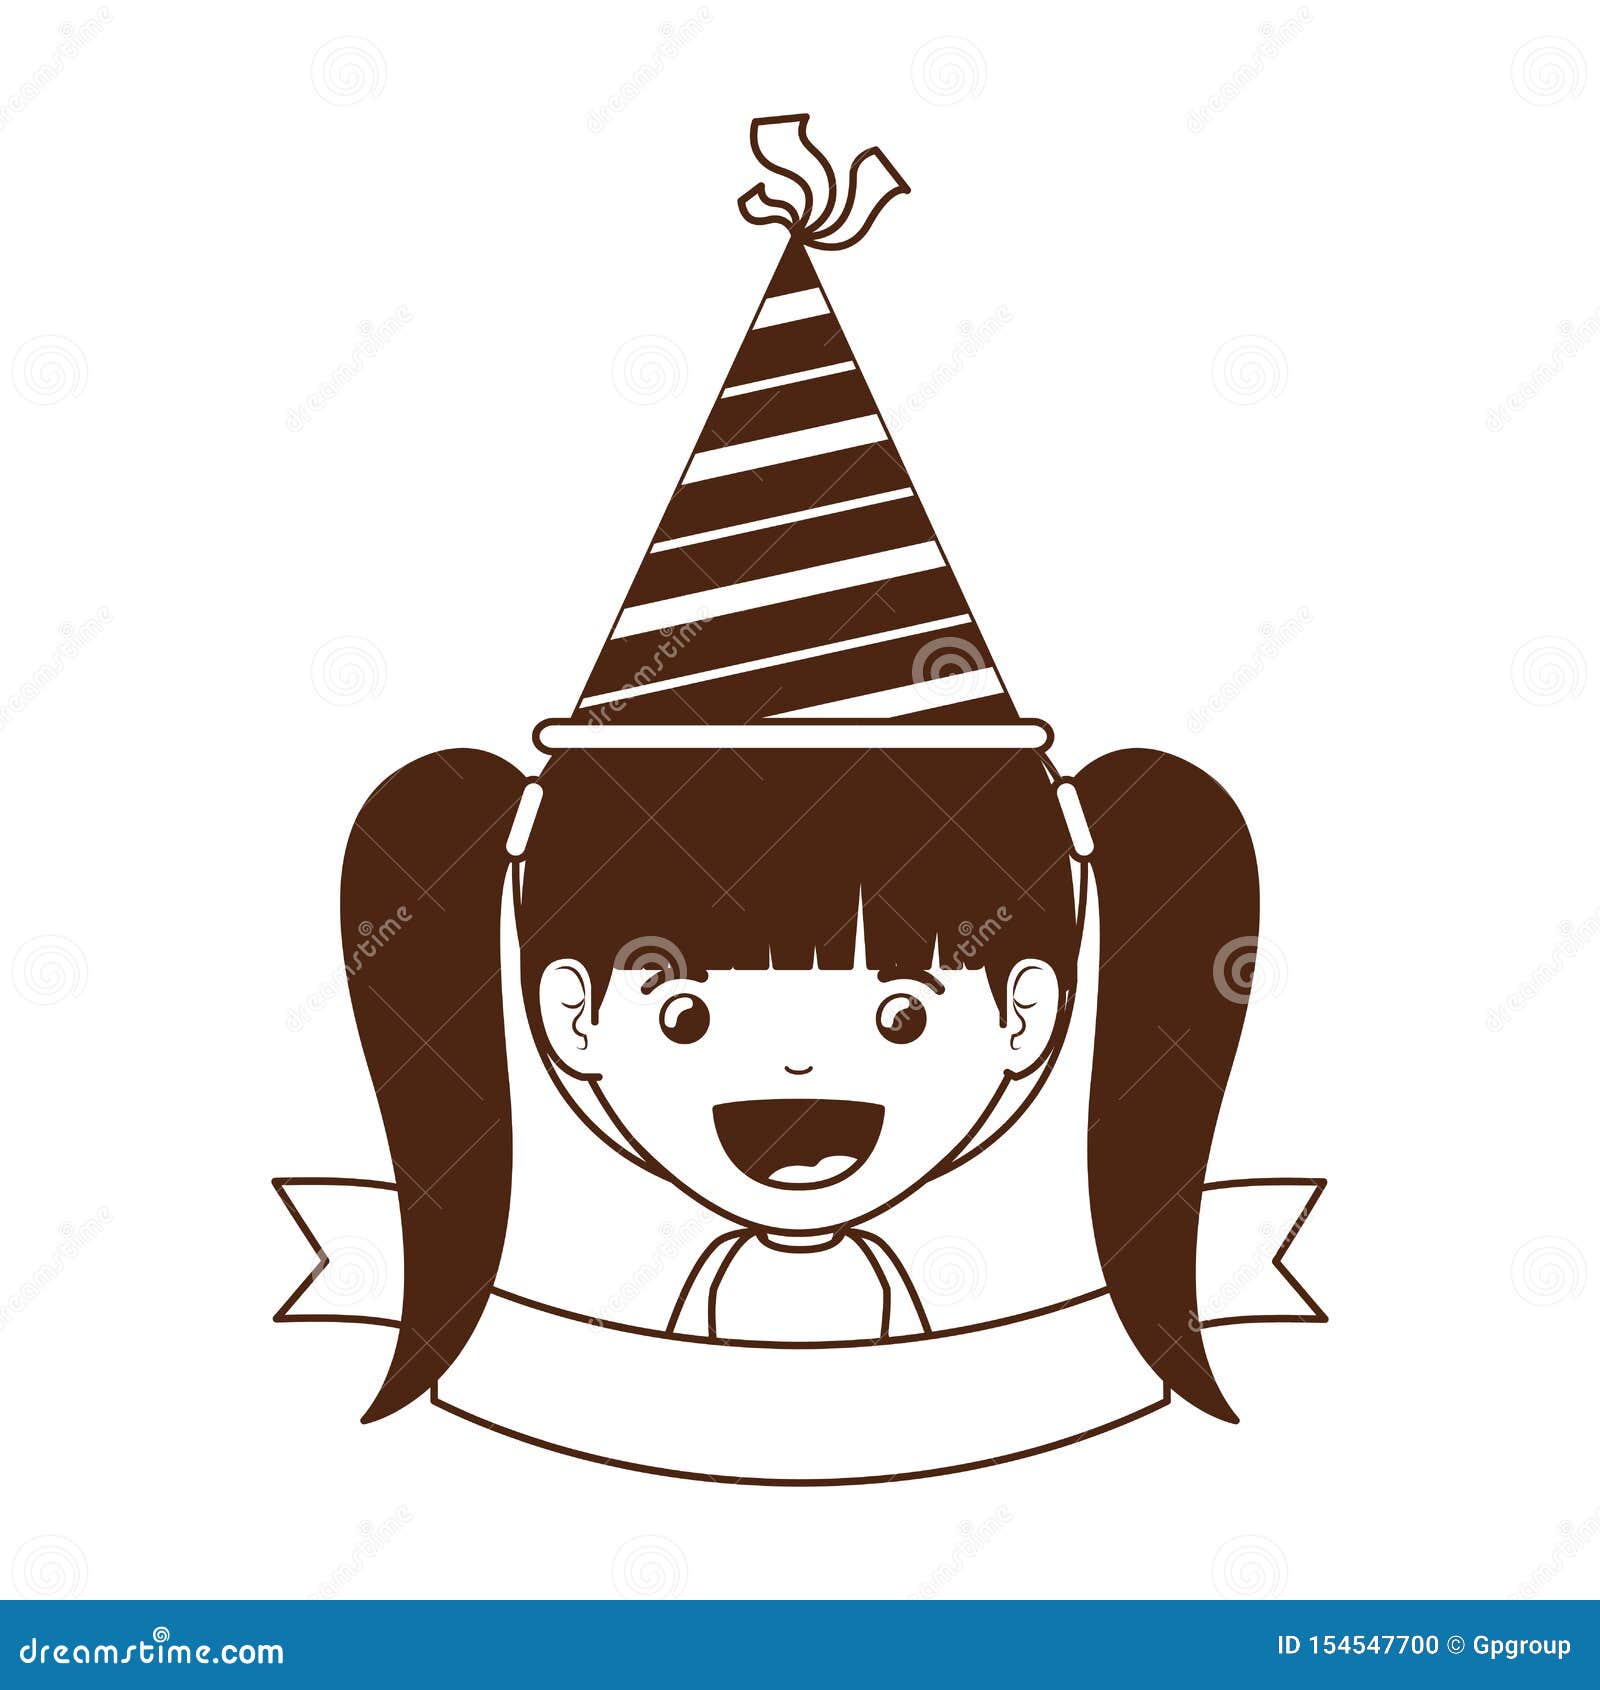 Download Silhouette Of Girl With Party Hat In Birthday Celebration ...